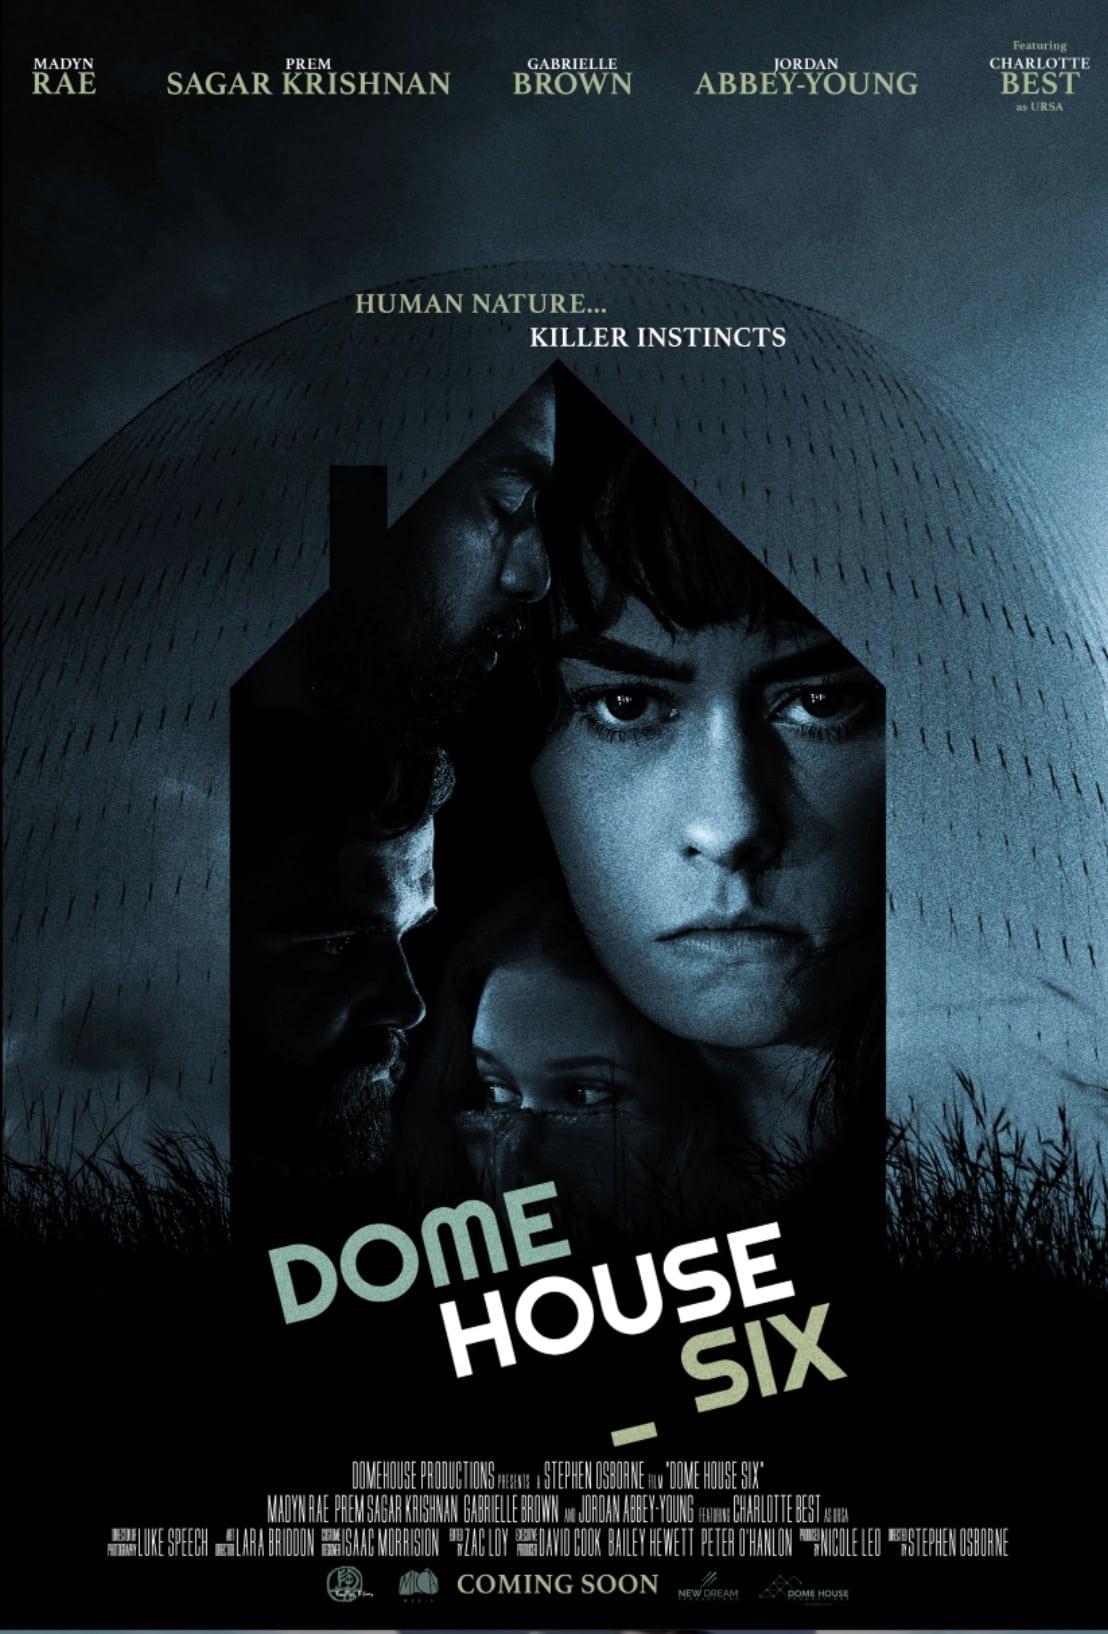 Dome House Six poster